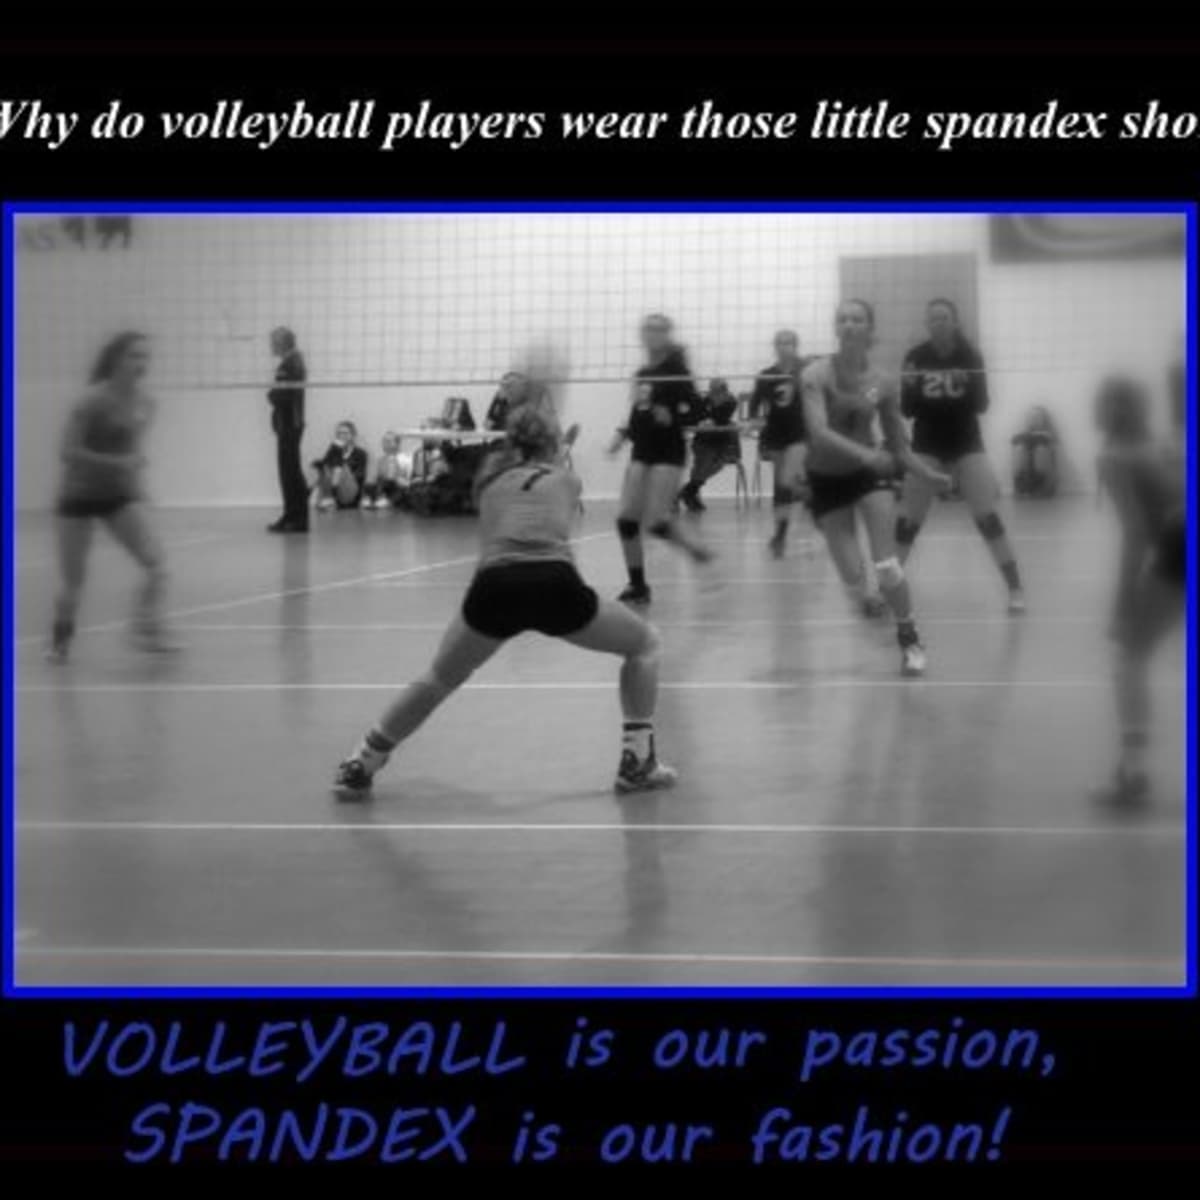 Bestudeer Verwachten eiland Why Are Volleyball Shorts so Short and Tight? - HowTheyPlay